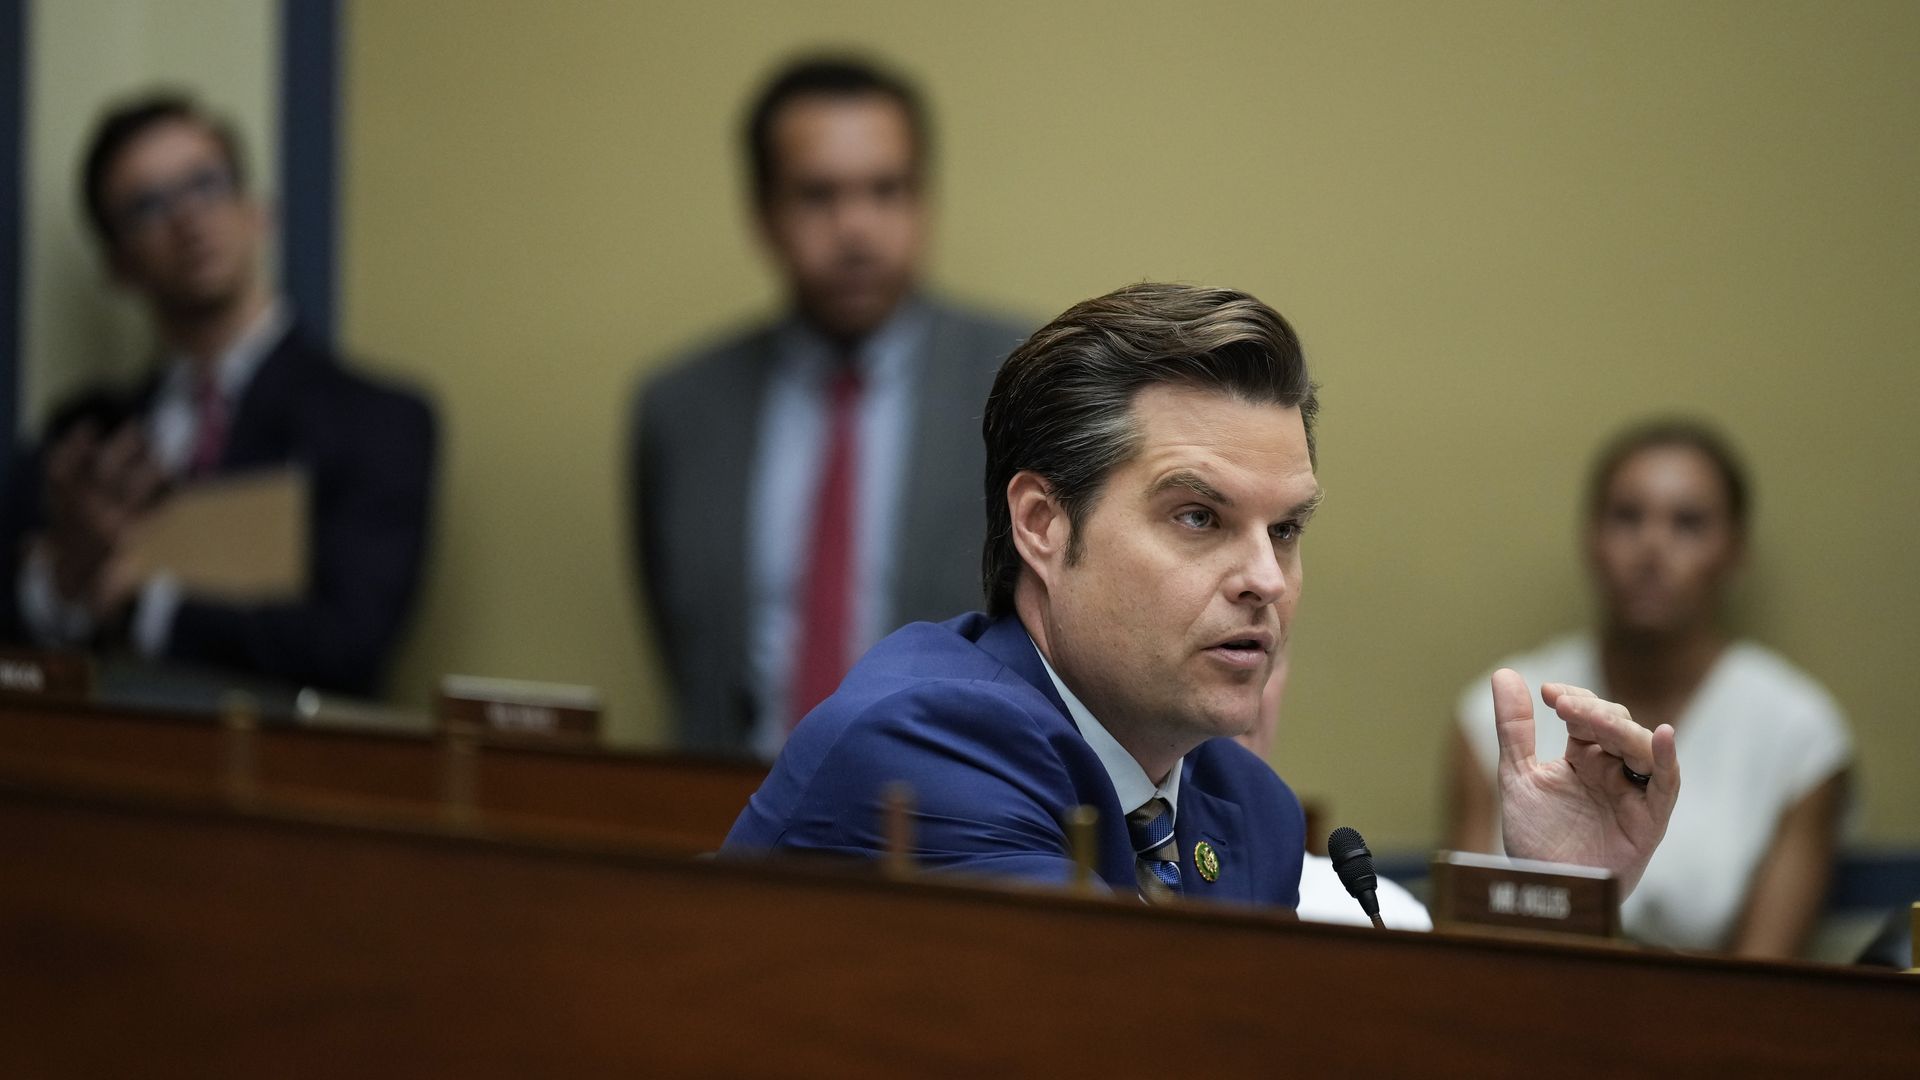 Gaetz speaks at a Congressional hearing 